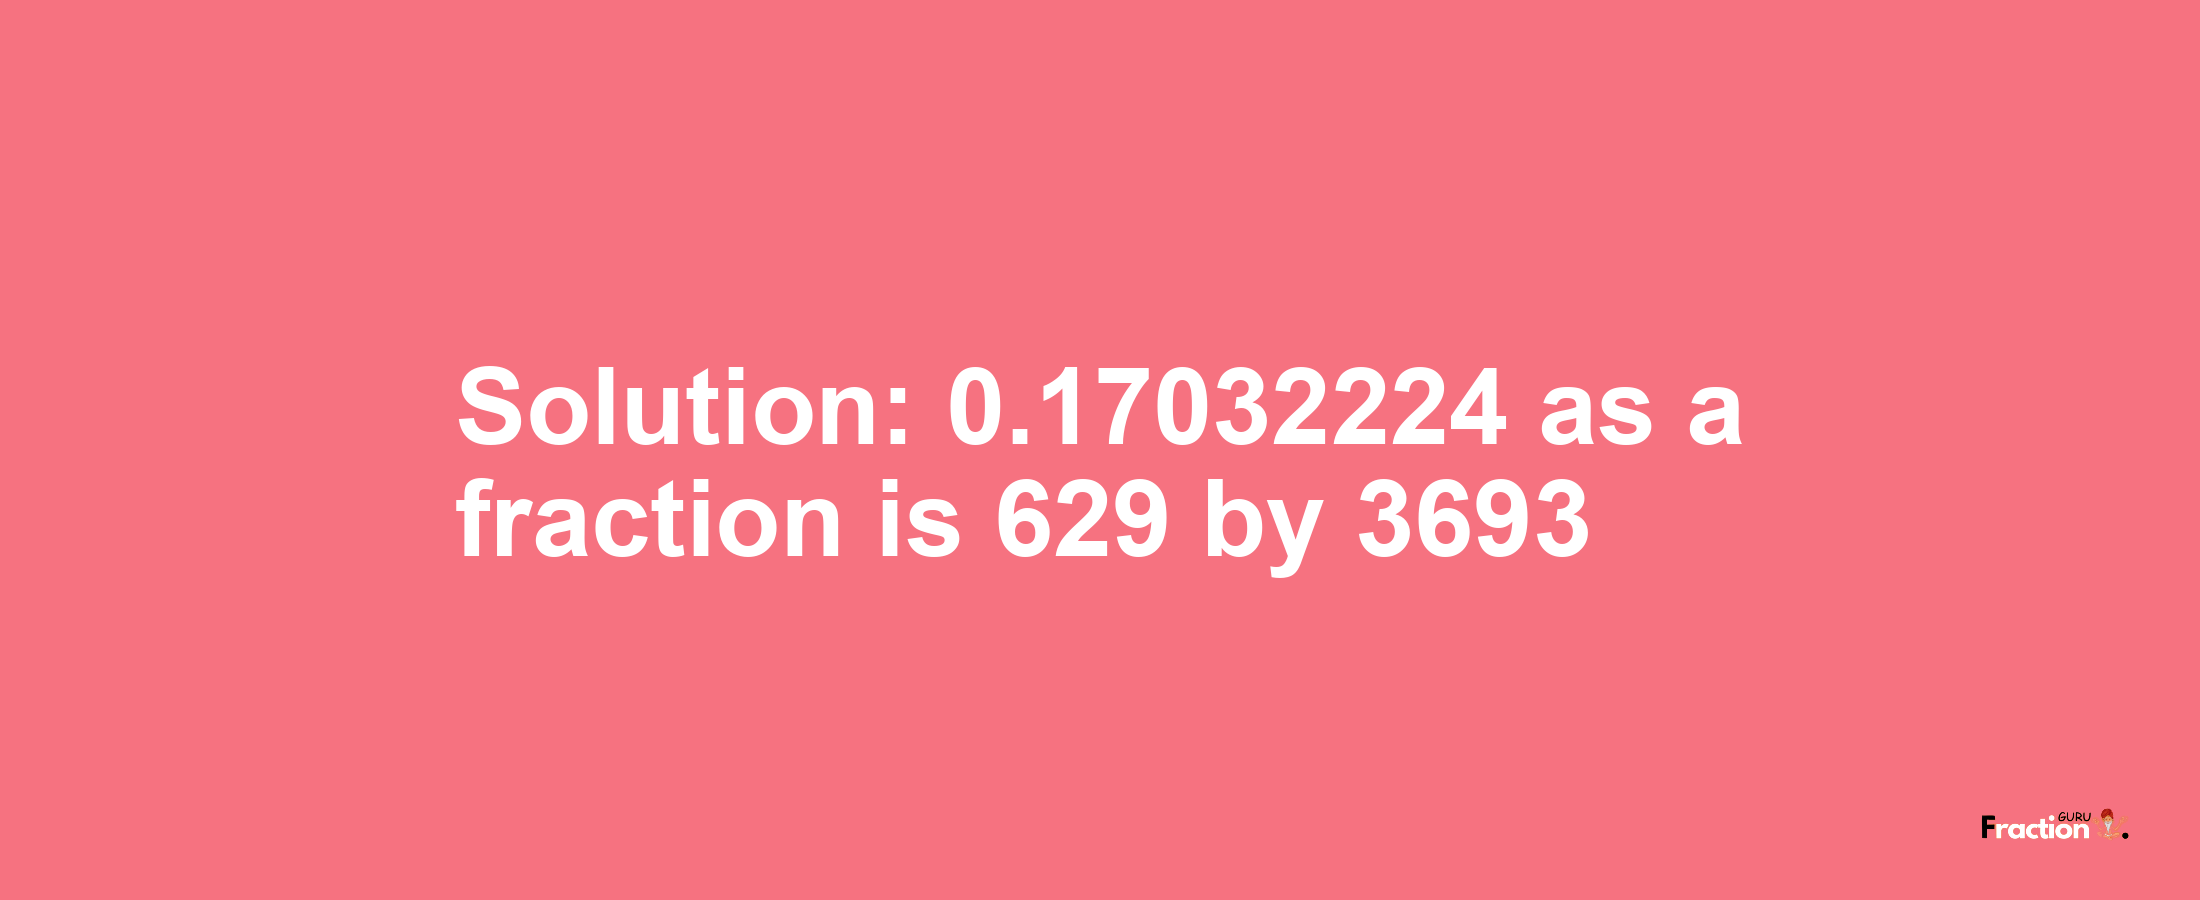 Solution:0.17032224 as a fraction is 629/3693